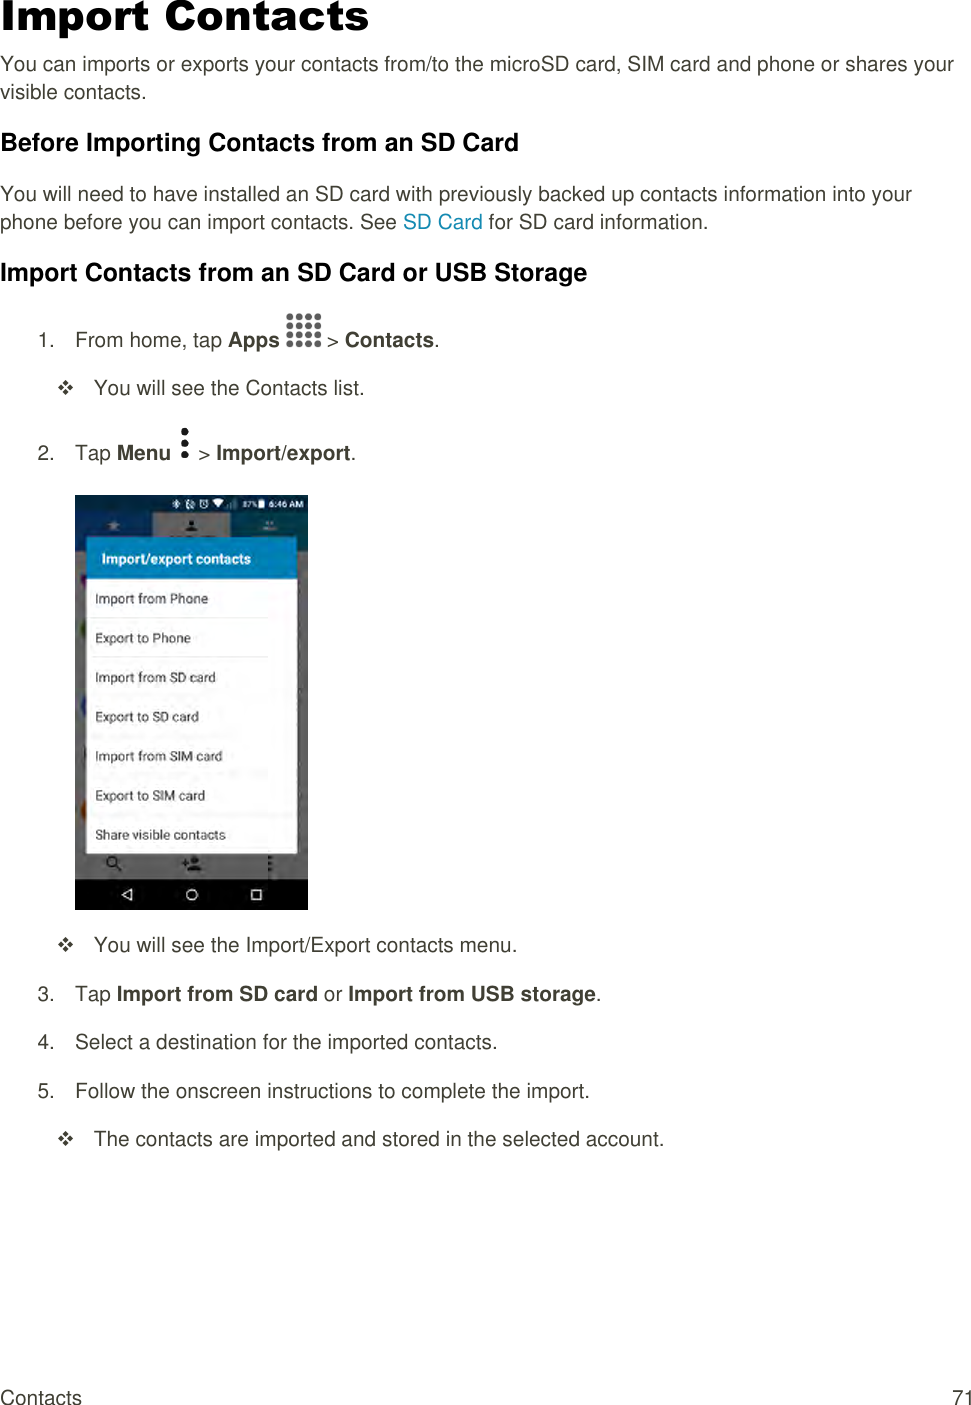 Contacts  71 Import Contacts You can imports or exports your contacts from/to the microSD card, SIM card and phone or shares your visible contacts. Before Importing Contacts from an SD Card You will need to have installed an SD card with previously backed up contacts information into your phone before you can import contacts. See SD Card for SD card information. Import Contacts from an SD Card or USB Storage 1.  From home, tap Apps   &gt; Contacts.    You will see the Contacts list. 2.  Tap Menu   &gt; Import/export.      You will see the Import/Export contacts menu. 3.  Tap Import from SD card or Import from USB storage.  4.  Select a destination for the imported contacts.  5.  Follow the onscreen instructions to complete the import.   The contacts are imported and stored in the selected account.   